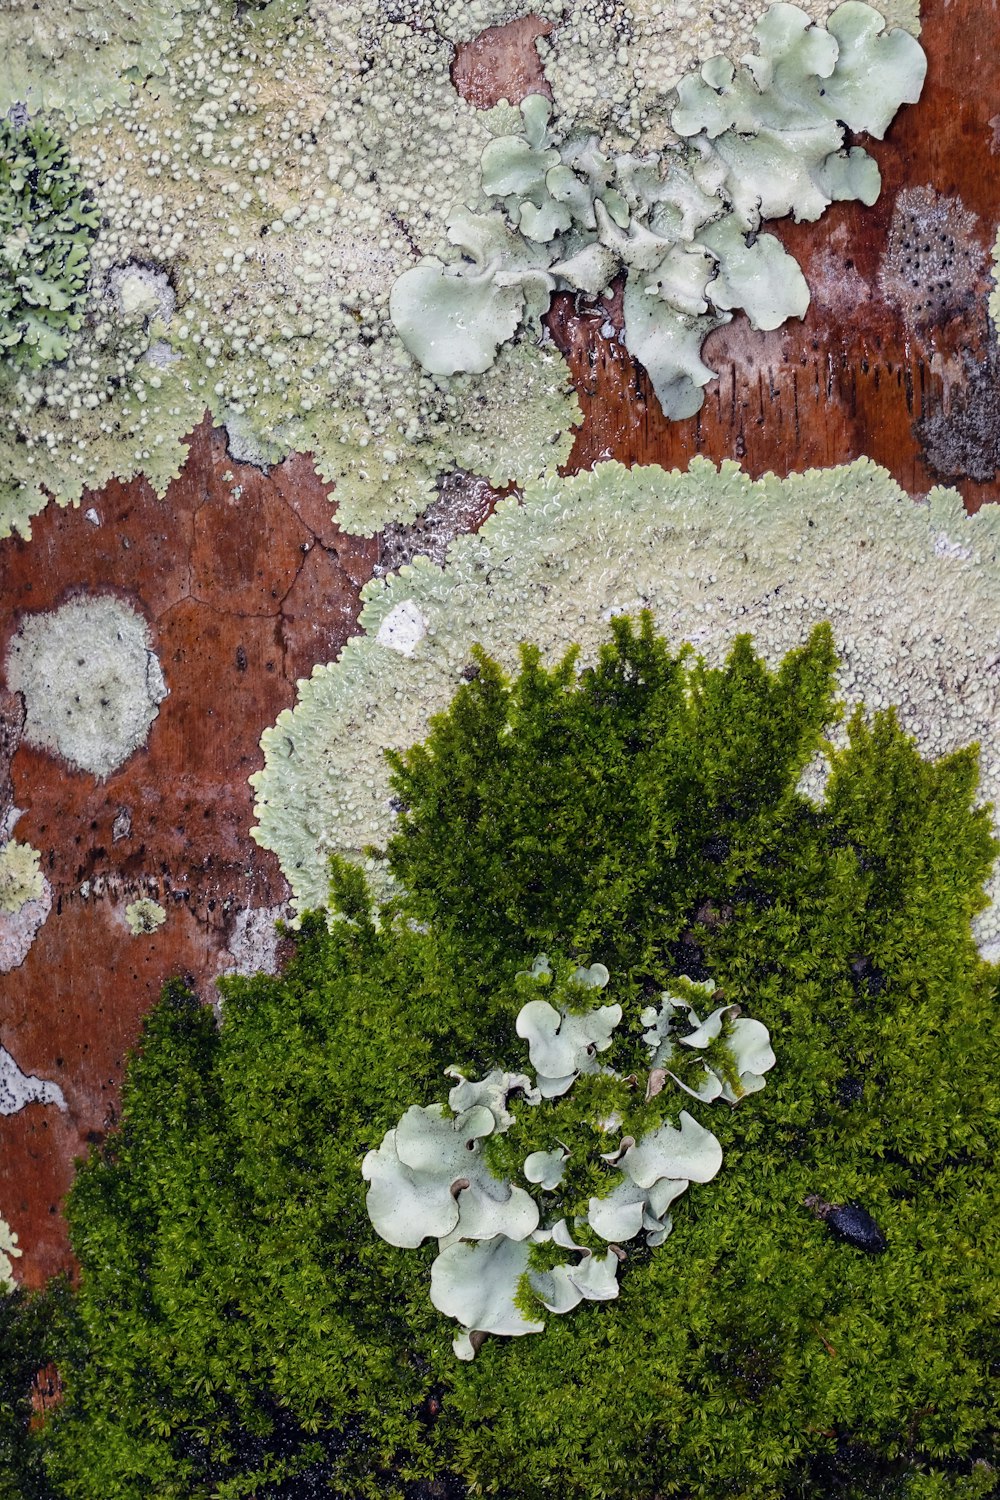 a close up of a tree with lichens on it